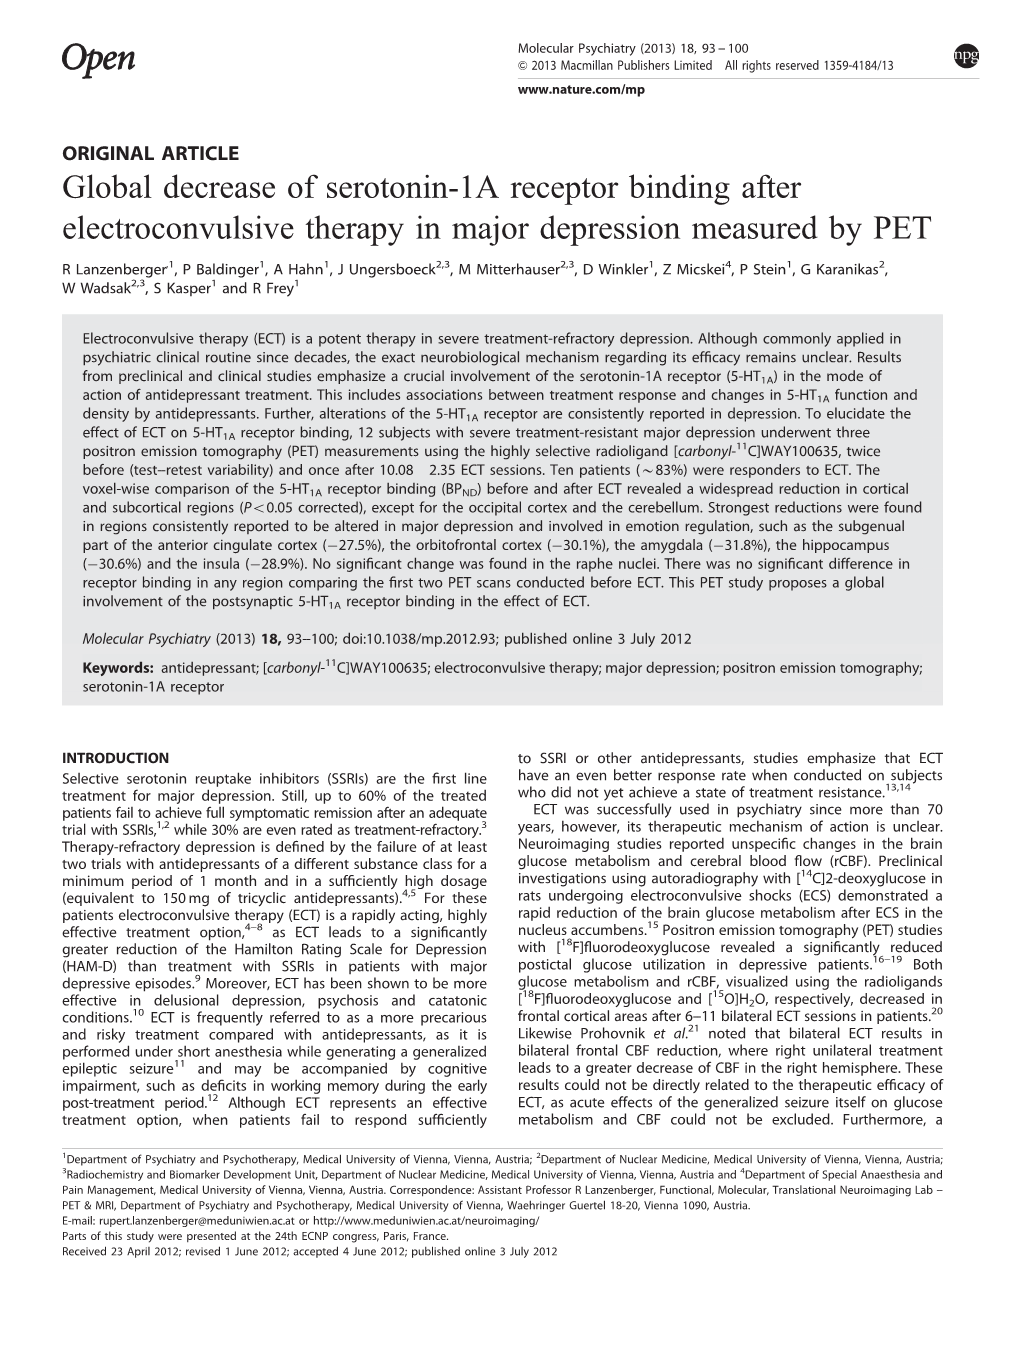 Global Decrease of Serotonin-1A Receptor Binding After Electroconvulsive Therapy in Major Depression Measured by PET